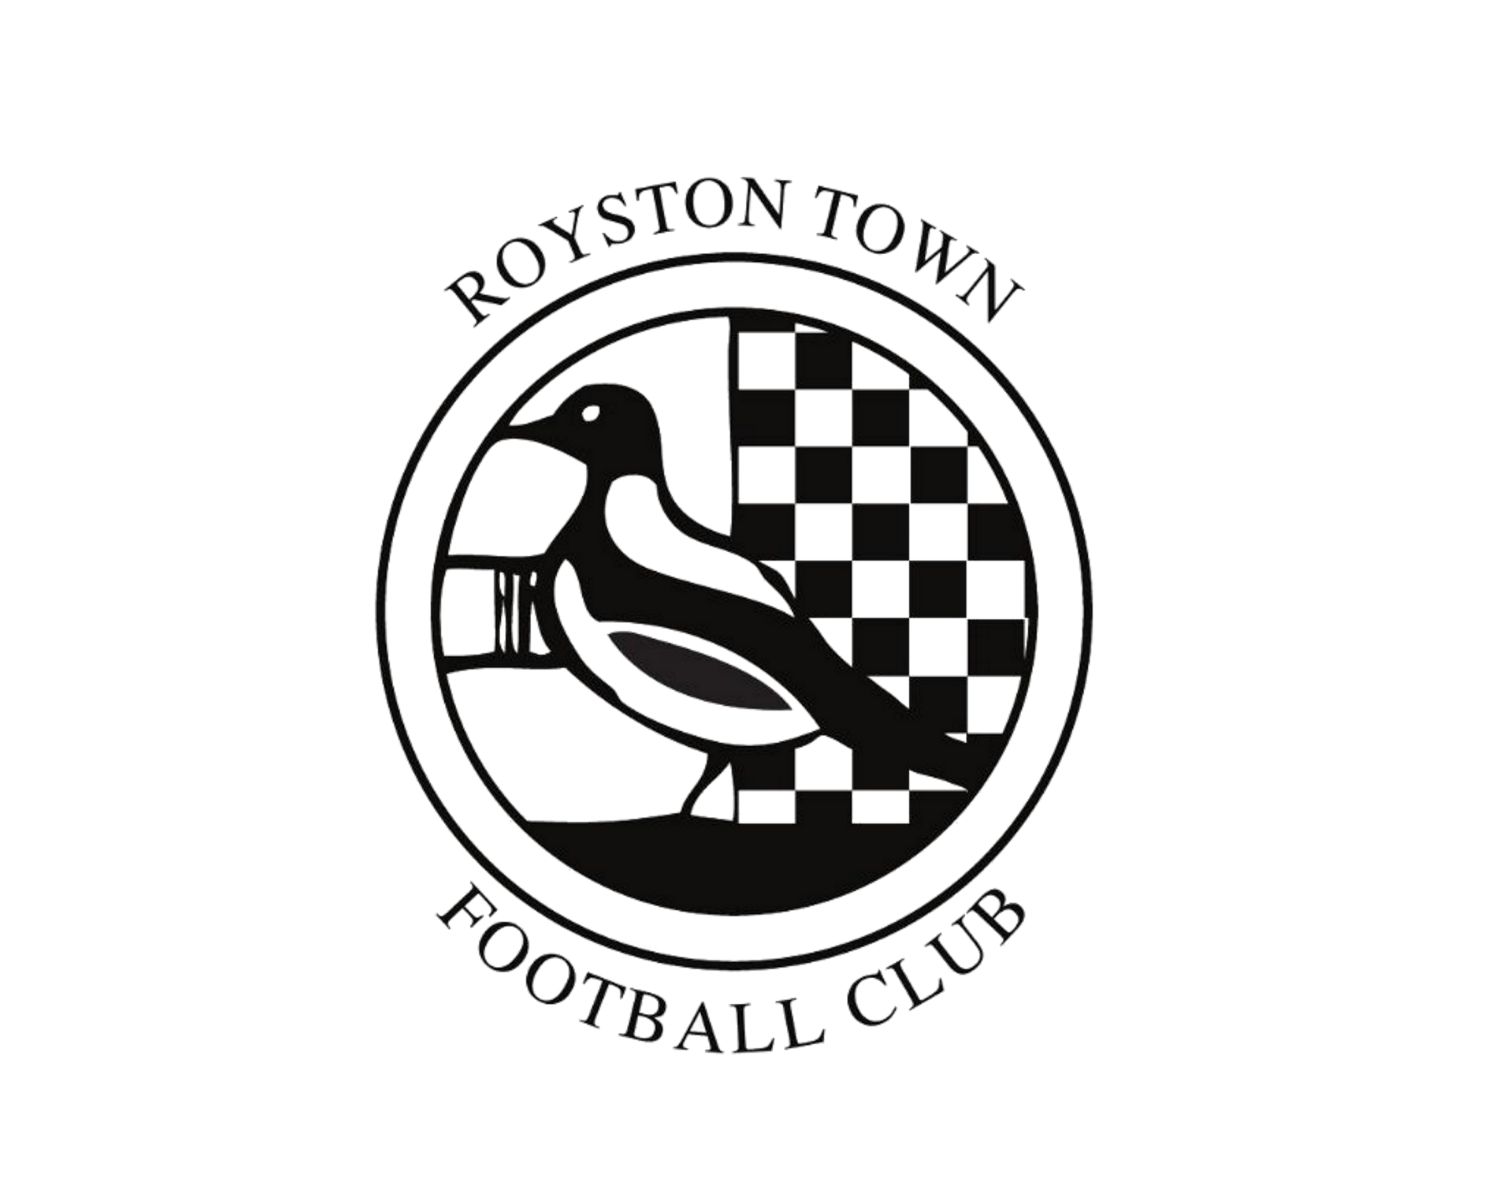 royston-town-fc-13-football-club-facts